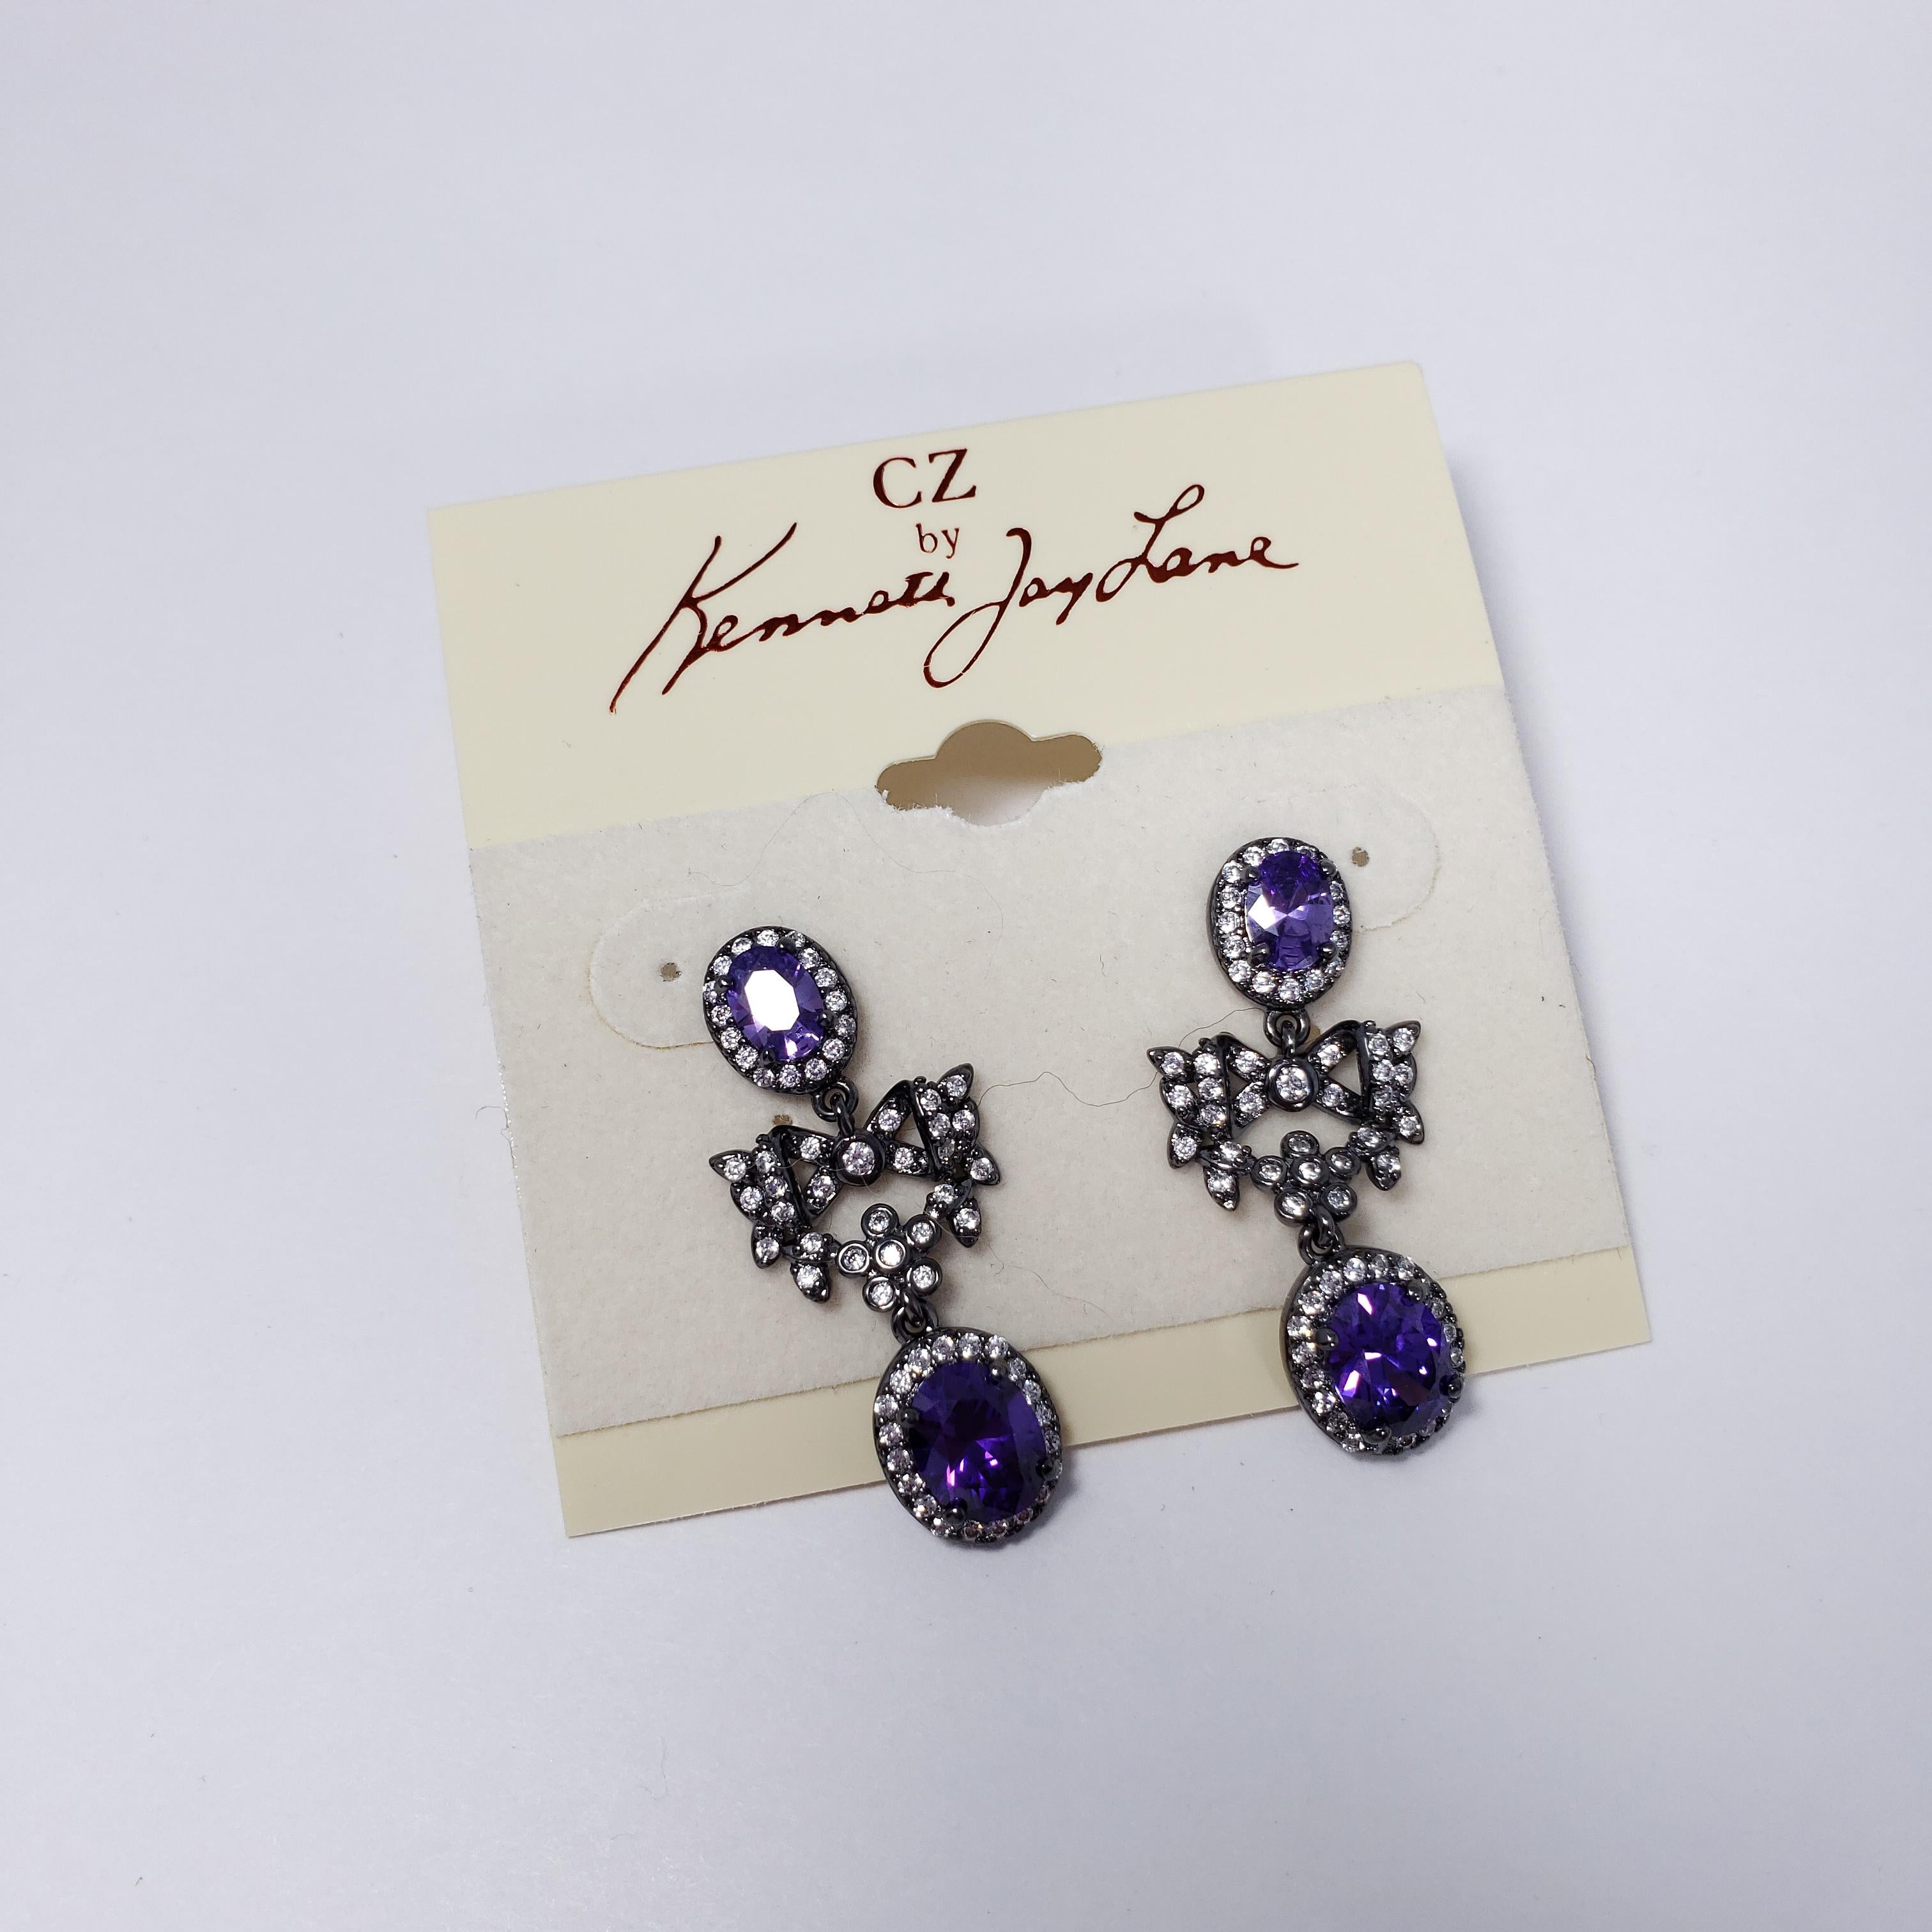 Cubic Zirconia by Kenneth Jay Lane P/8 Cttw oval with bow drop earrings . Each earring features two amethyst cubic zirconia crystals accented with clear crystals. Post backs.

Cubic Zirconia line by KJL. Designer sign.